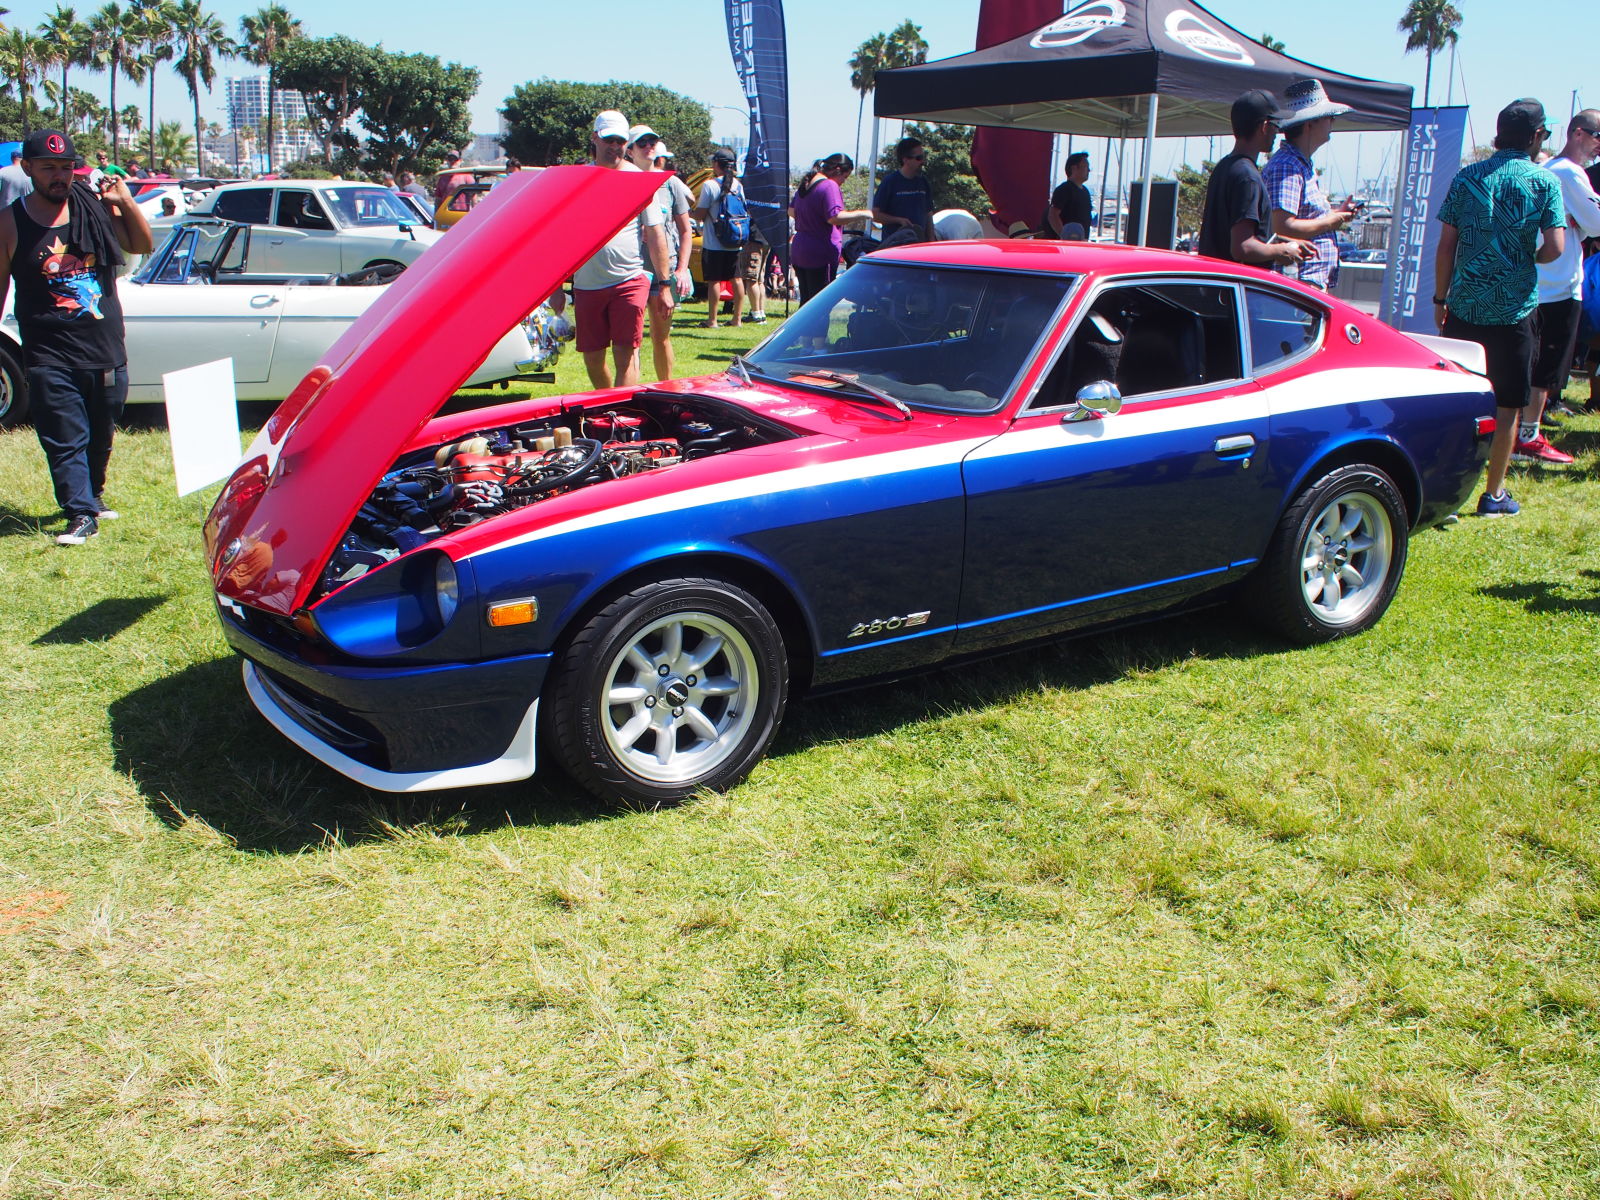 Pretty snazzy paint job on this 280Z.